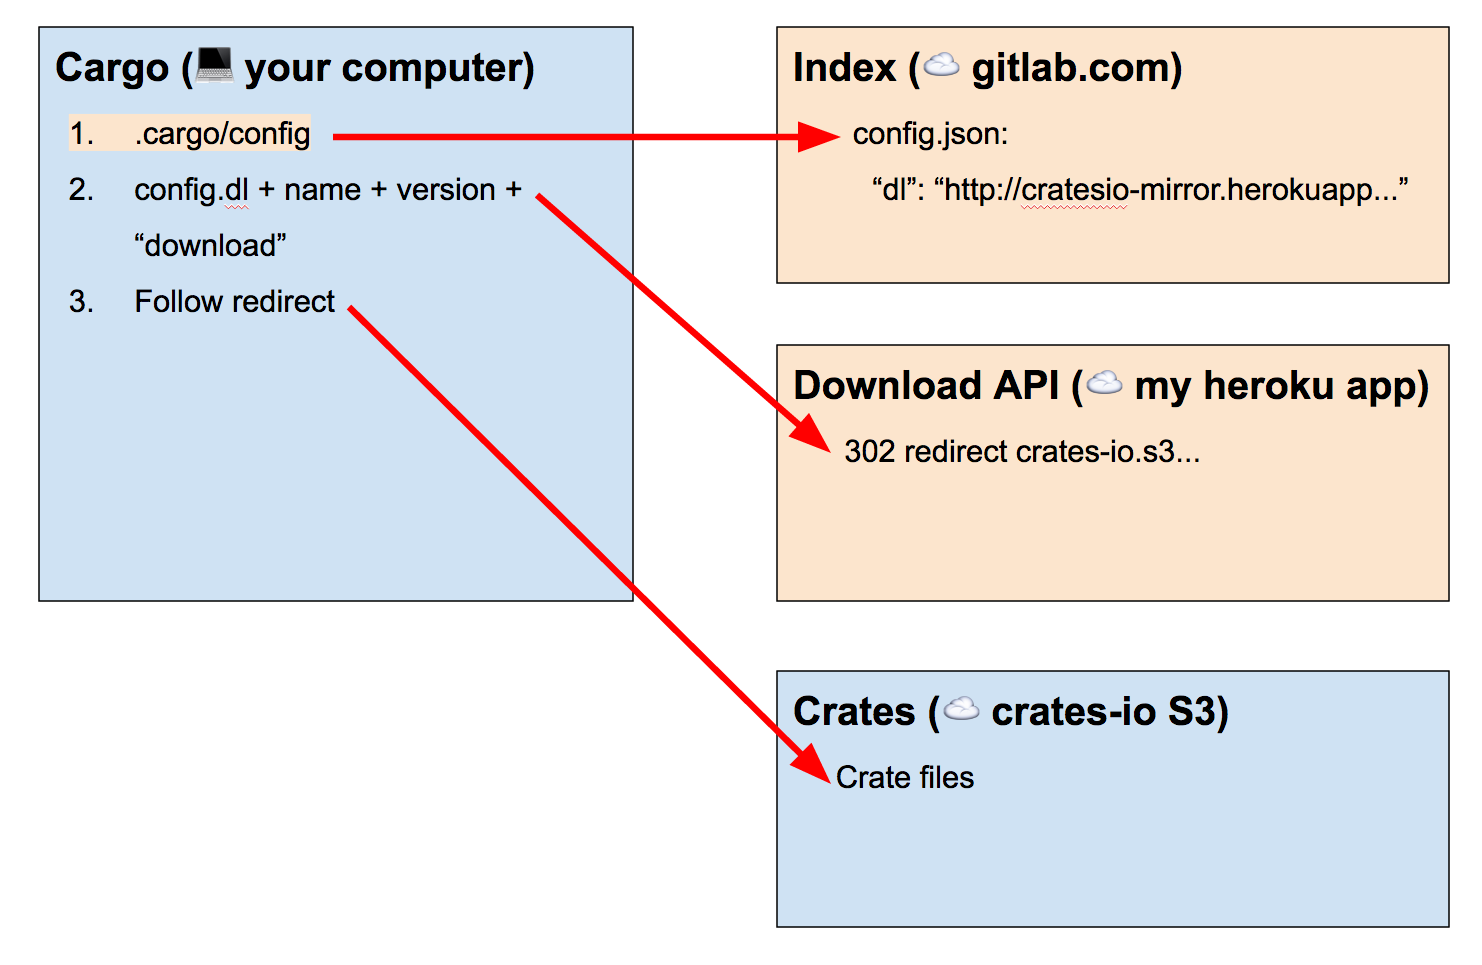 Diagram showing Cargo on your computer configured to use the registry index on GitLab, whose config.json is pointing to a different Heroku app, but which is still redirecting to crates.io's S3 bucket.